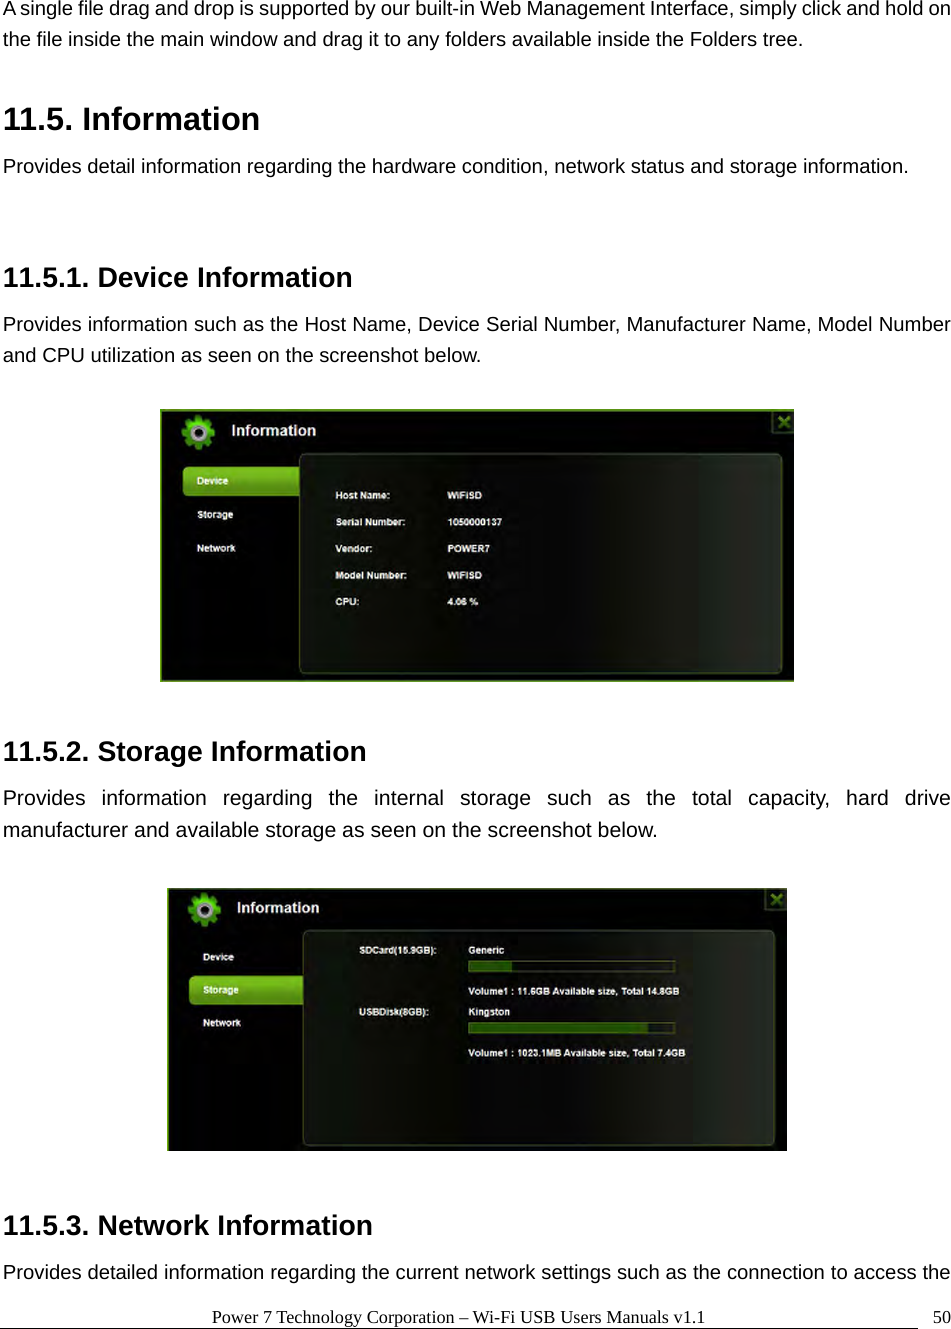 Power 7 Technology Corporation – Wi-Fi USB Users Manuals v1.1  50A single file drag and drop is supported by our built-in Web Management Interface, simply click and hold on the file inside the main window and drag it to any folders available inside the Folders tree.    11.5. Information Provides detail information regarding the hardware condition, network status and storage information.  11.5.1. Device Information Provides information such as the Host Name, Device Serial Number, Manufacturer Name, Model Number and CPU utilization as seen on the screenshot below.      11.5.2. Storage Information Provides information regarding the internal storage such as the total capacity, hard drive manufacturer and available storage as seen on the screenshot below.    11.5.3. Network Information Provides detailed information regarding the current network settings such as the connection to access the 